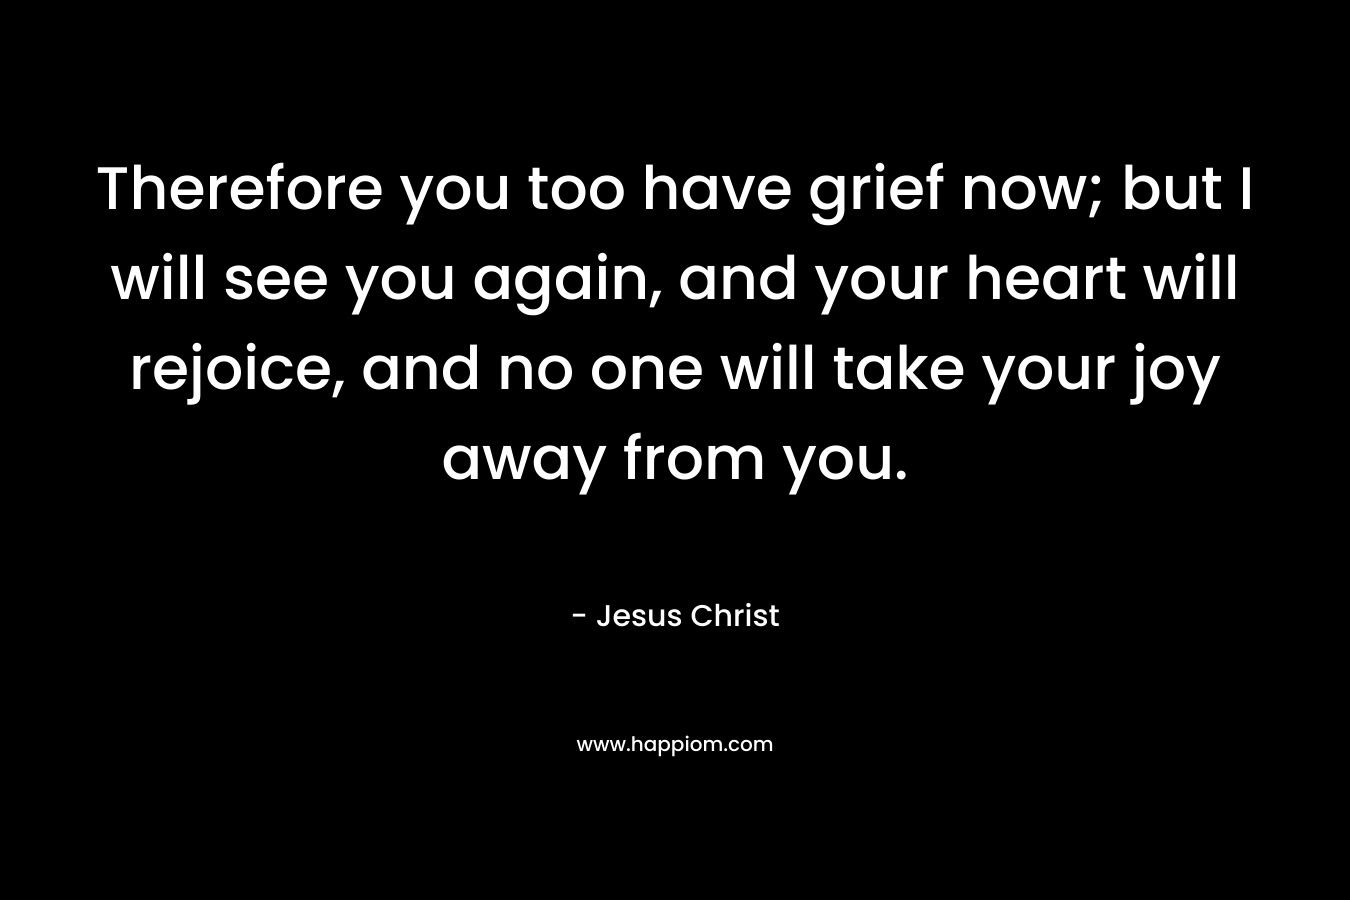 Therefore you too have grief now; but I will see you again, and your heart will rejoice, and no one will take your joy away from you.